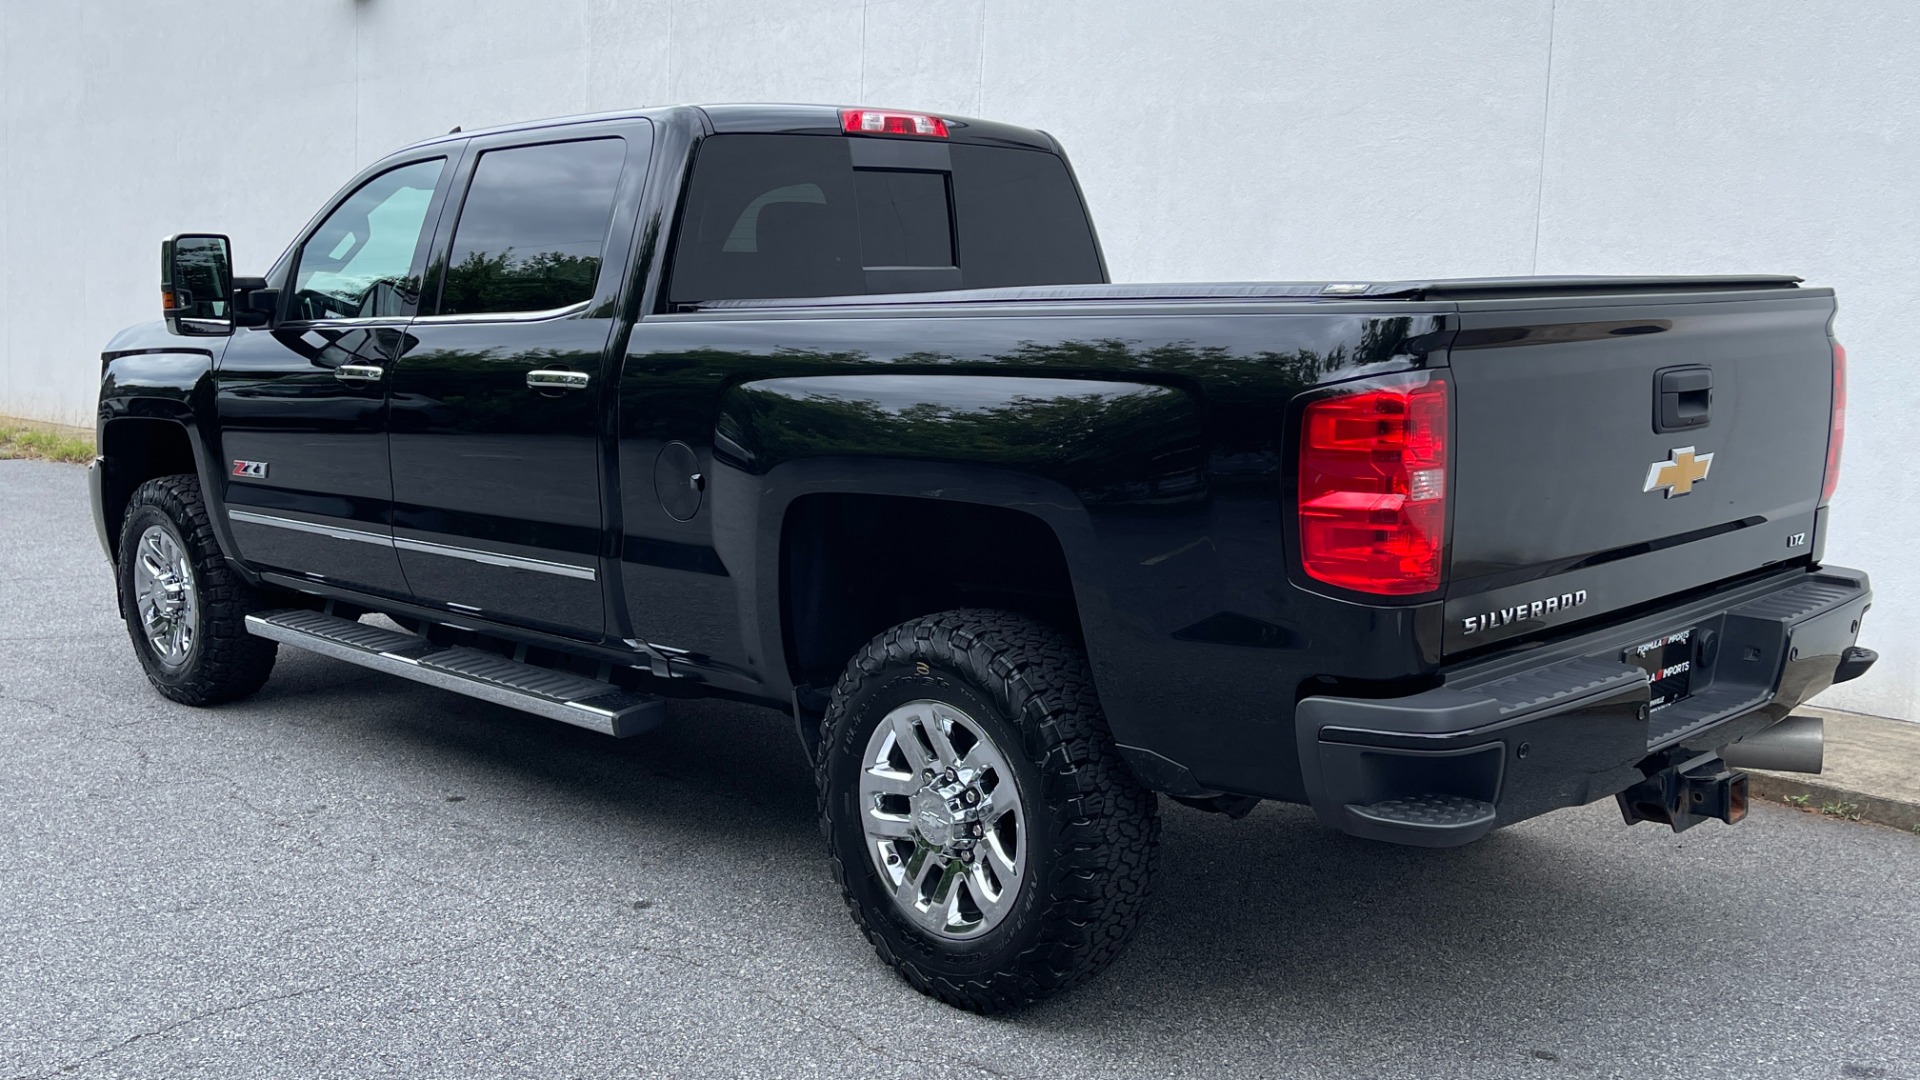 Used 2018 Chevrolet Silverado 3500HD LTZ / DURAMAX PLUS PACKAGE / SPORT EDITION / Z71 OFFROAD / SUNROOF / LEATHE for sale Sold at Formula Imports in Charlotte NC 28227 6